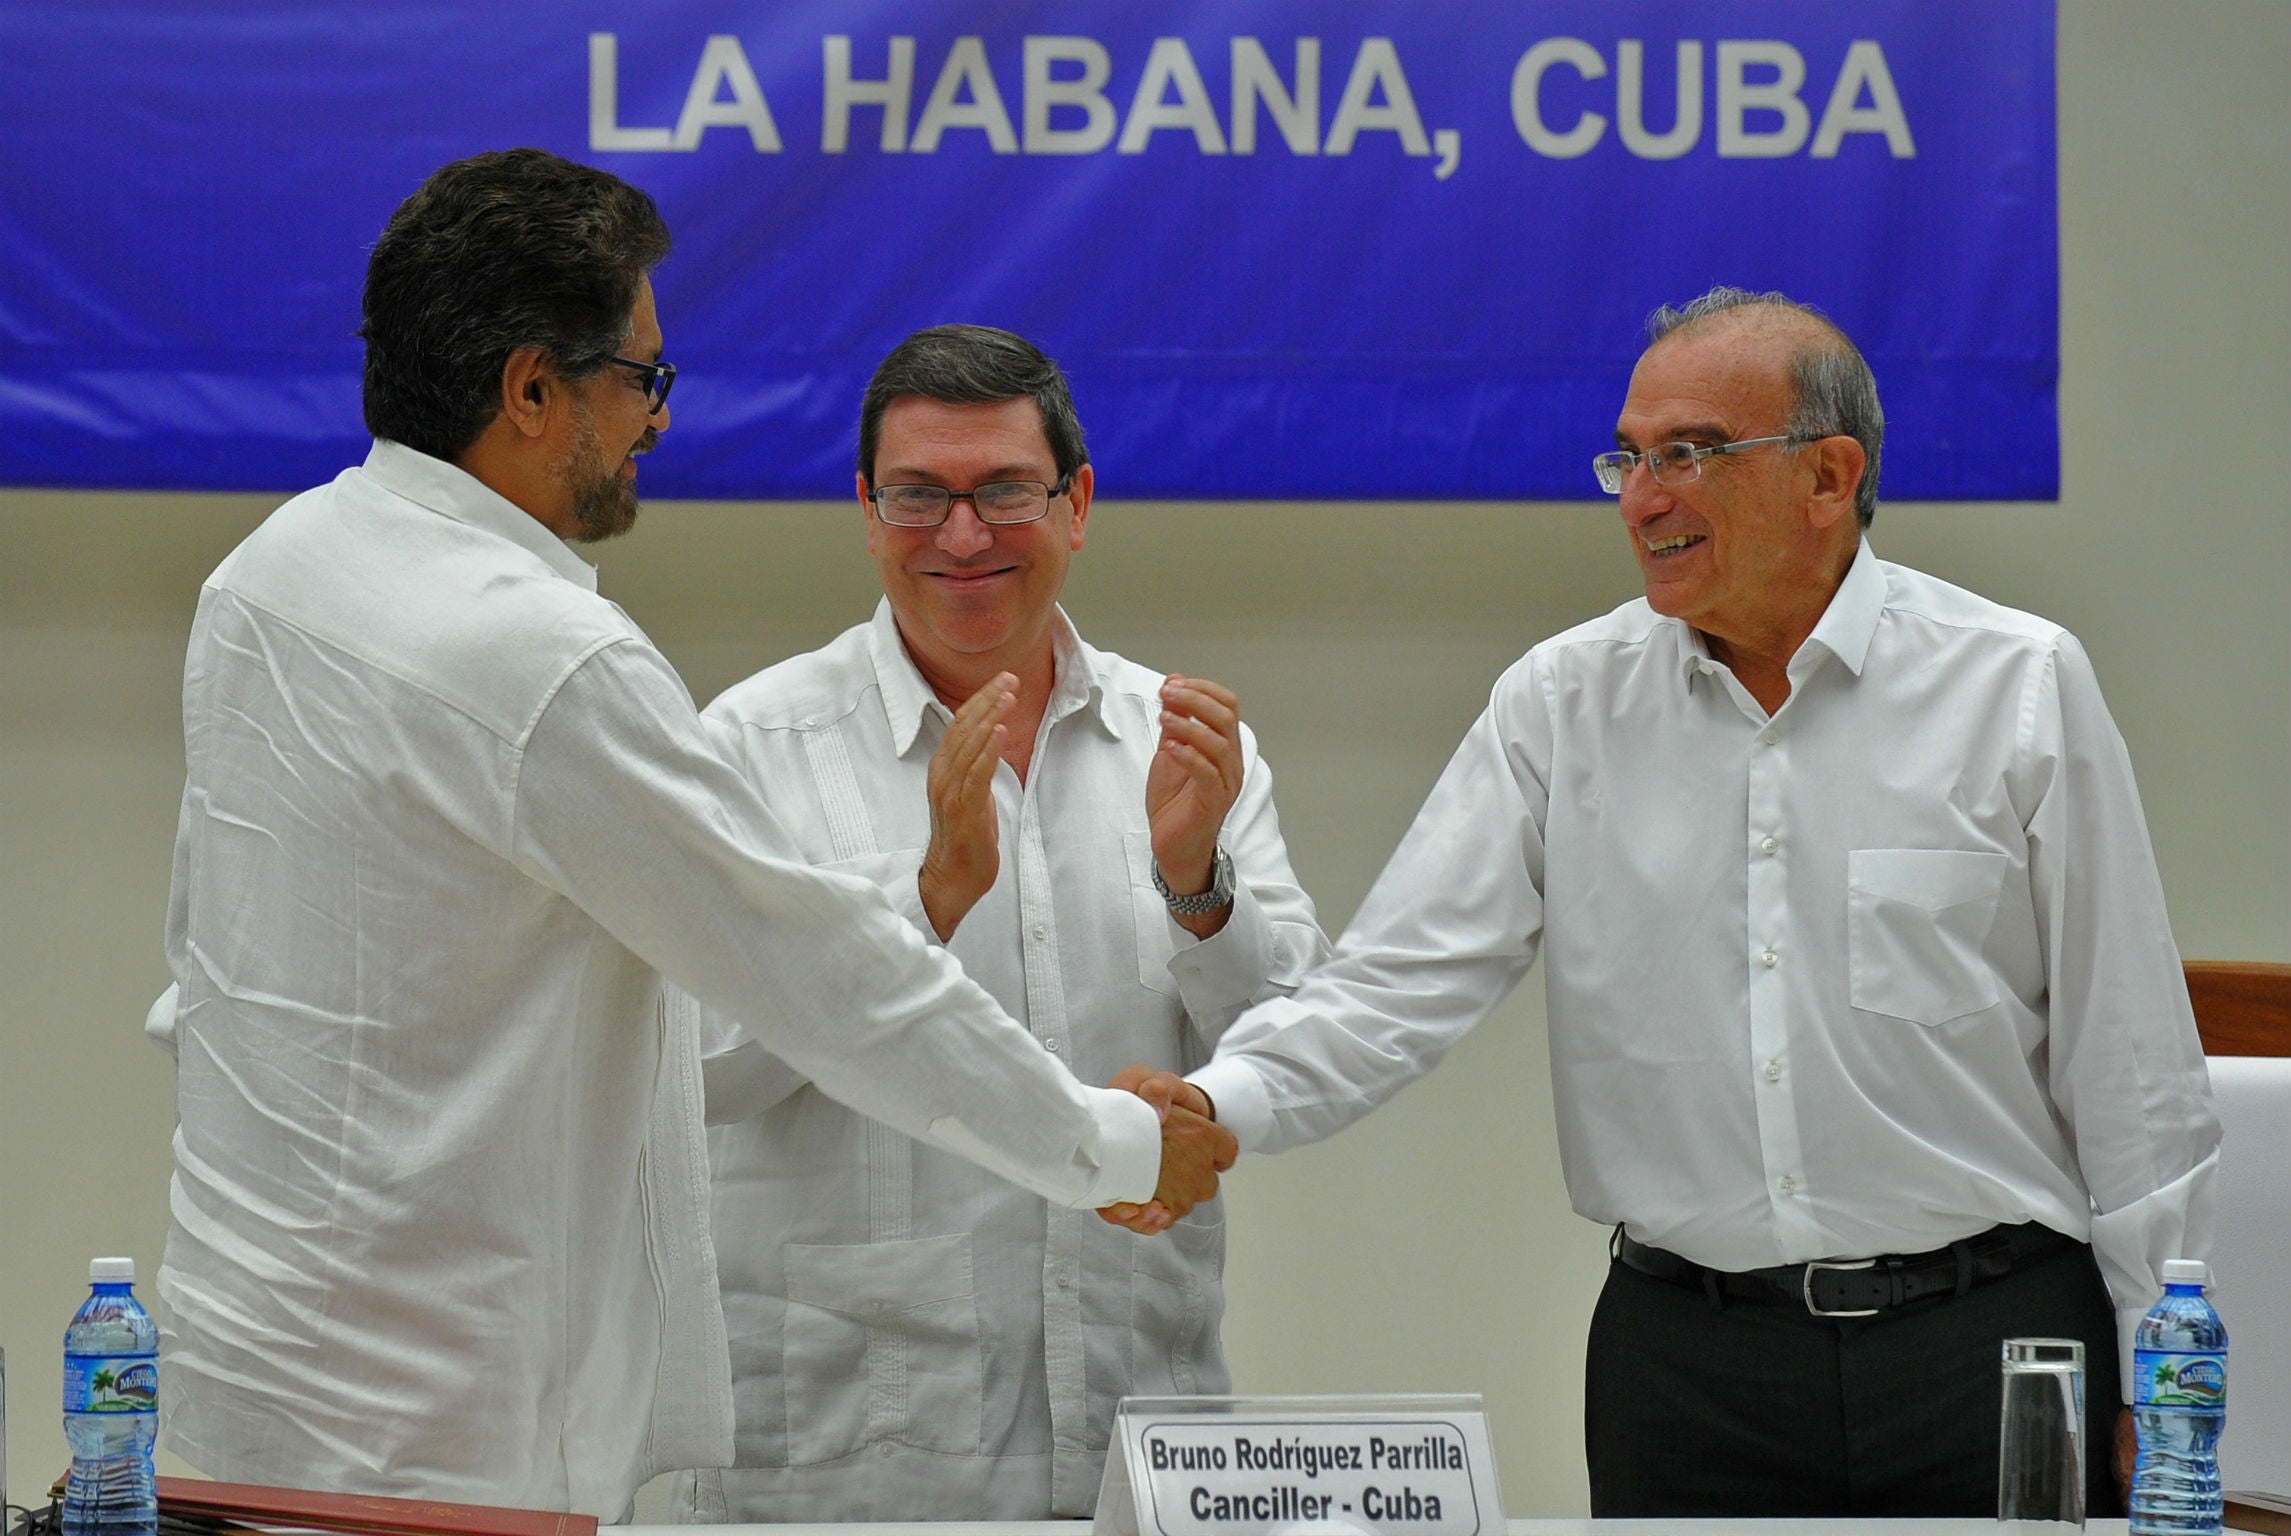 Colombia's Humberto de la Calle (right) and the FARC Commander Ivan Marquez (left) shake hands upon the signing of the agreement at the Convention Palace in Havana